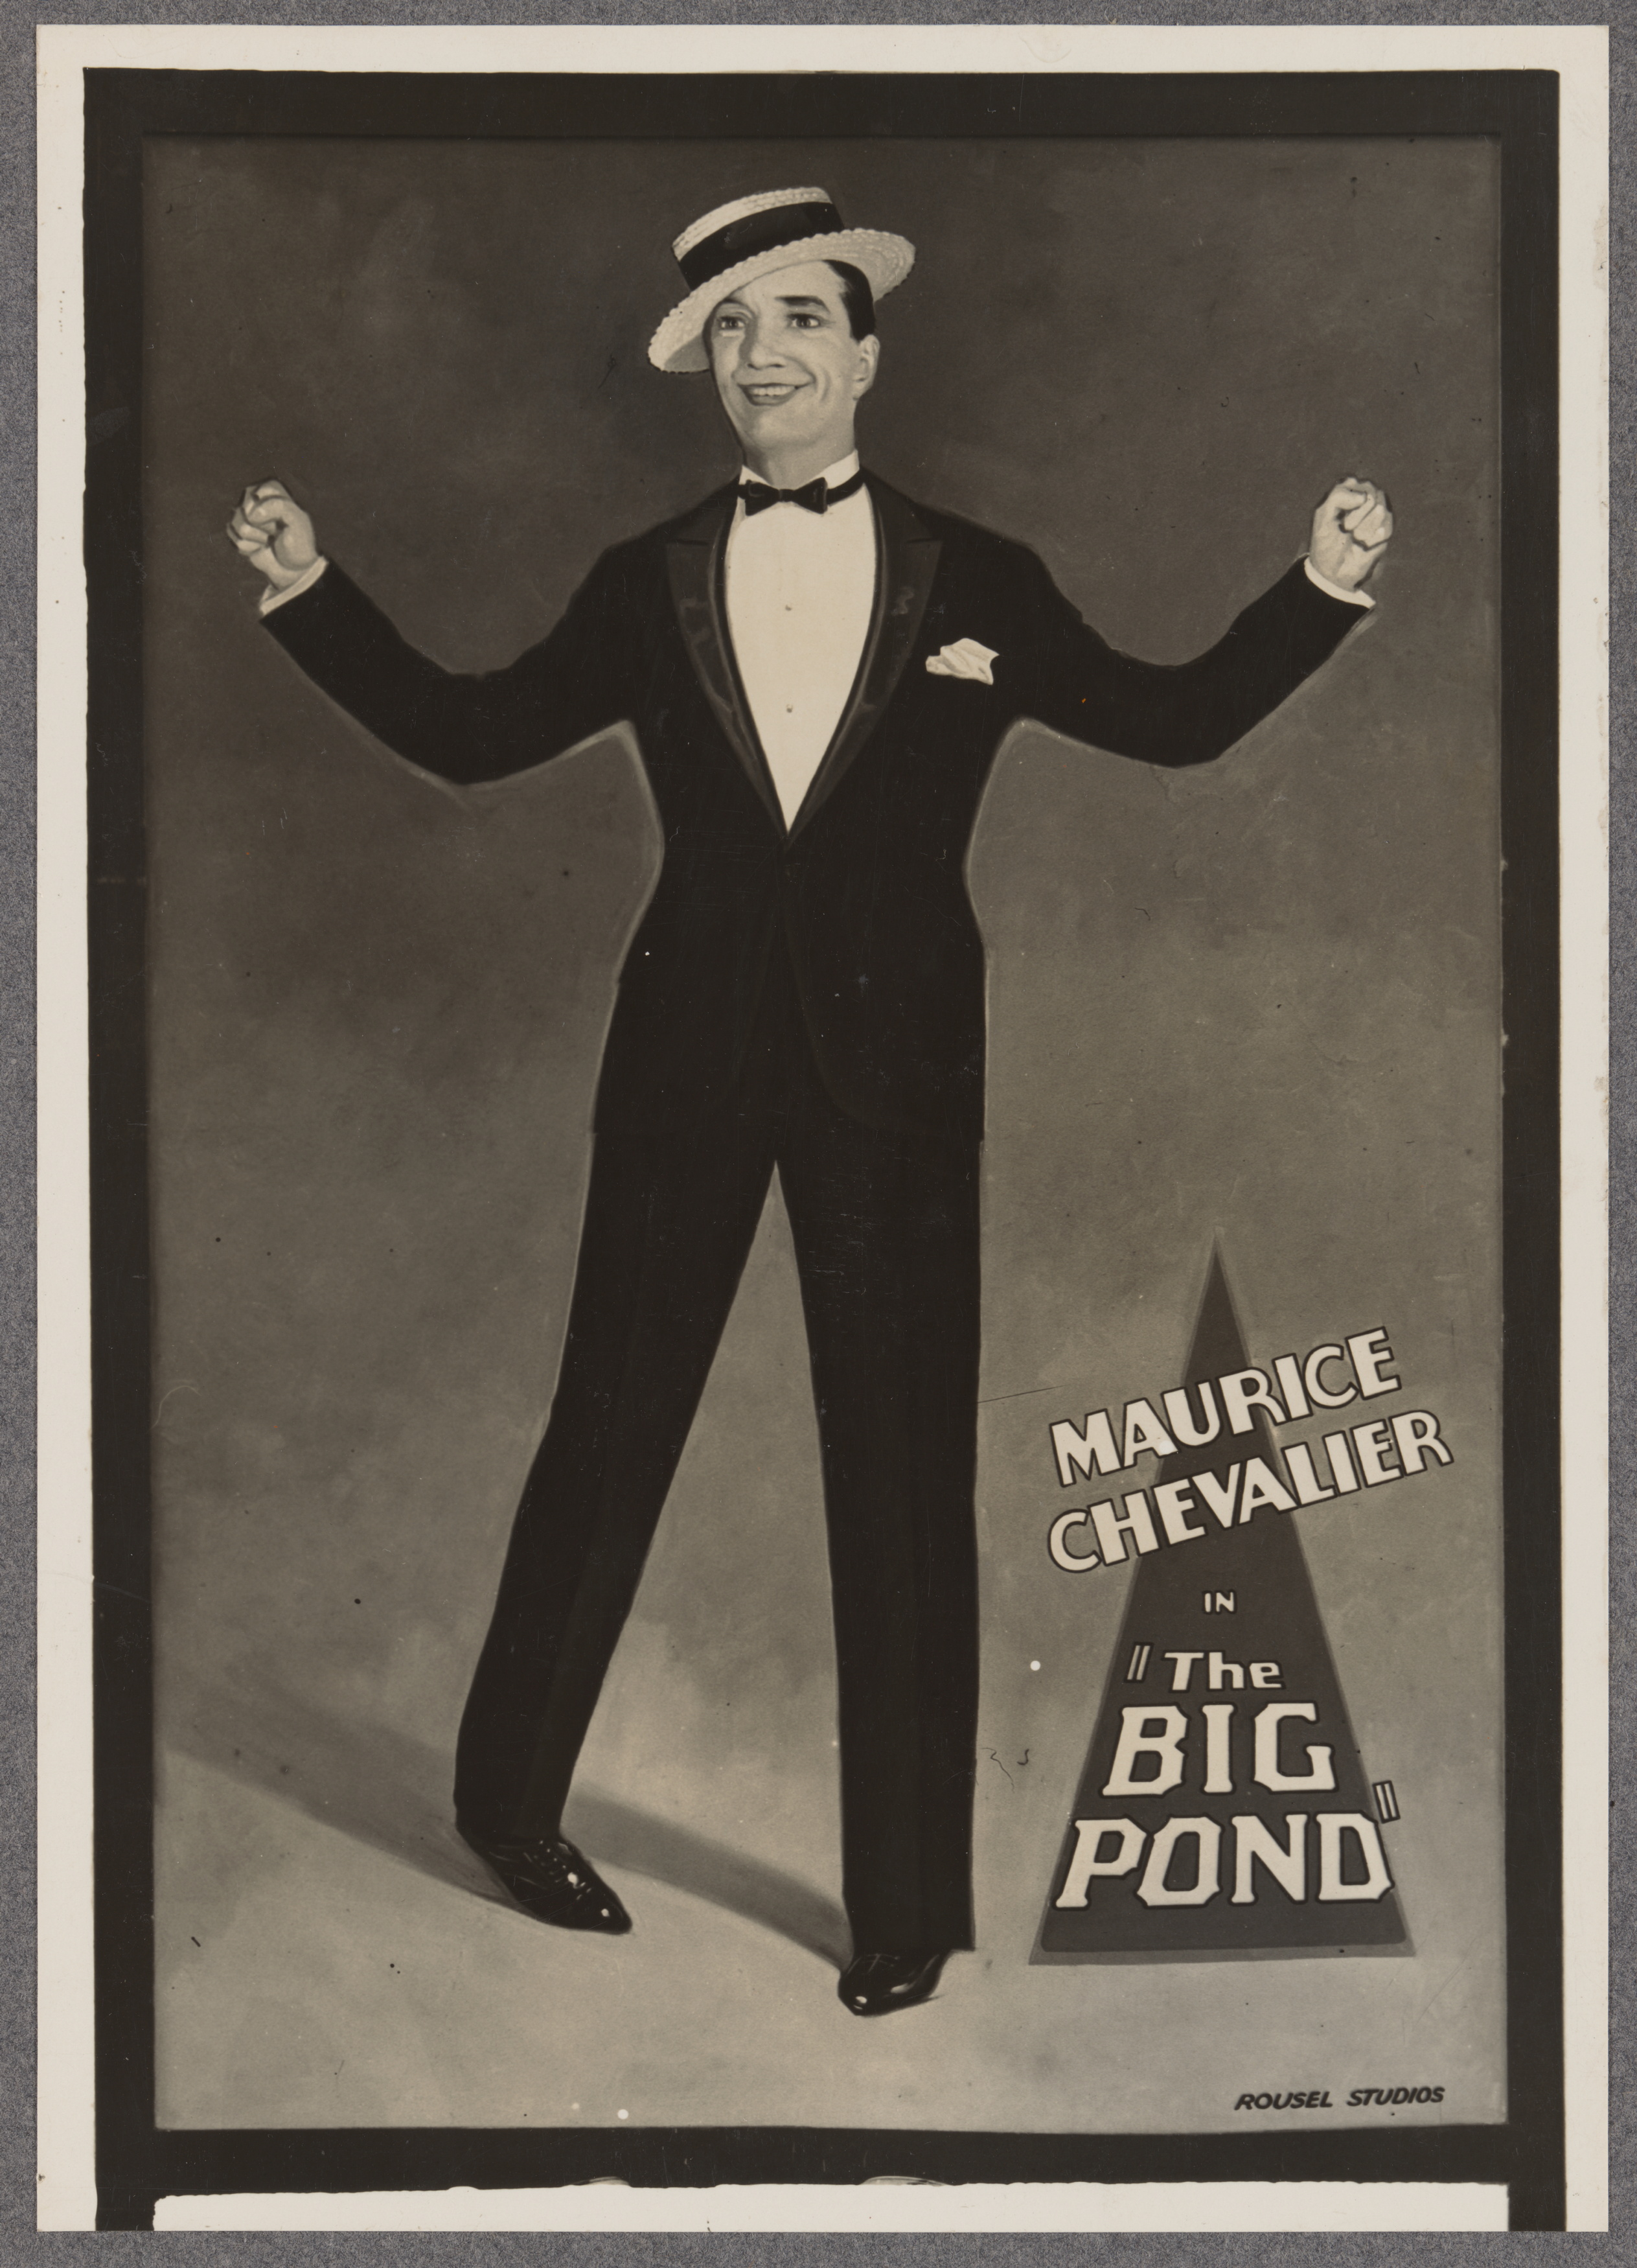 Photograph of large wall sign advertising the film "The Big Pond" starring Maurice Chevalier at the Prince Edward Theatre